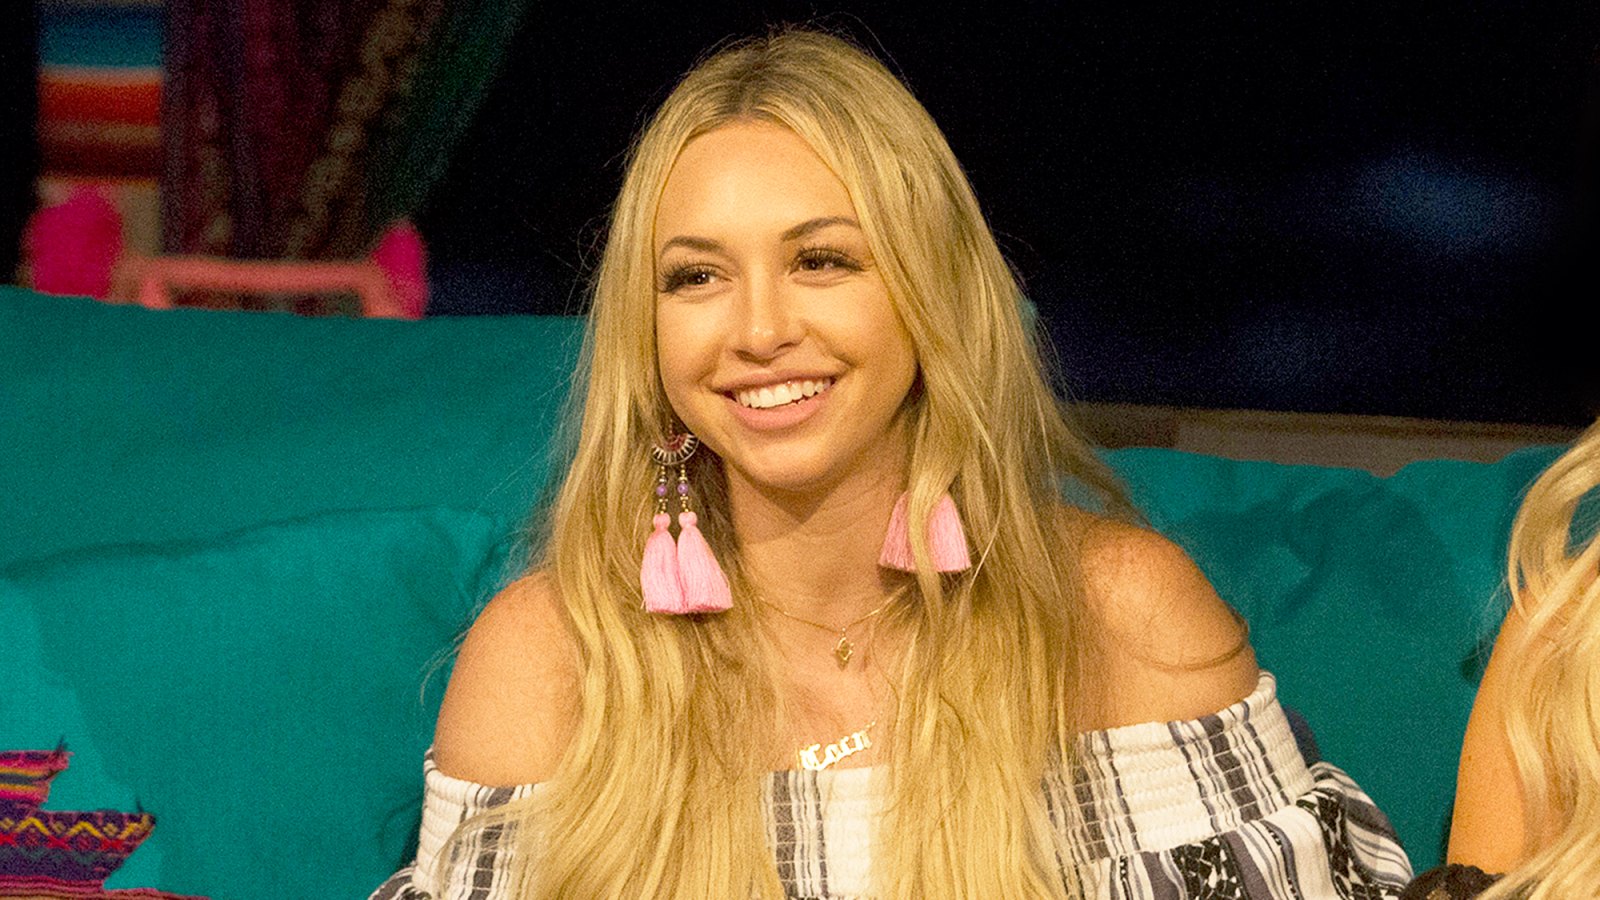 Corinne Olympios on ‘Bachelor in Paradise‘